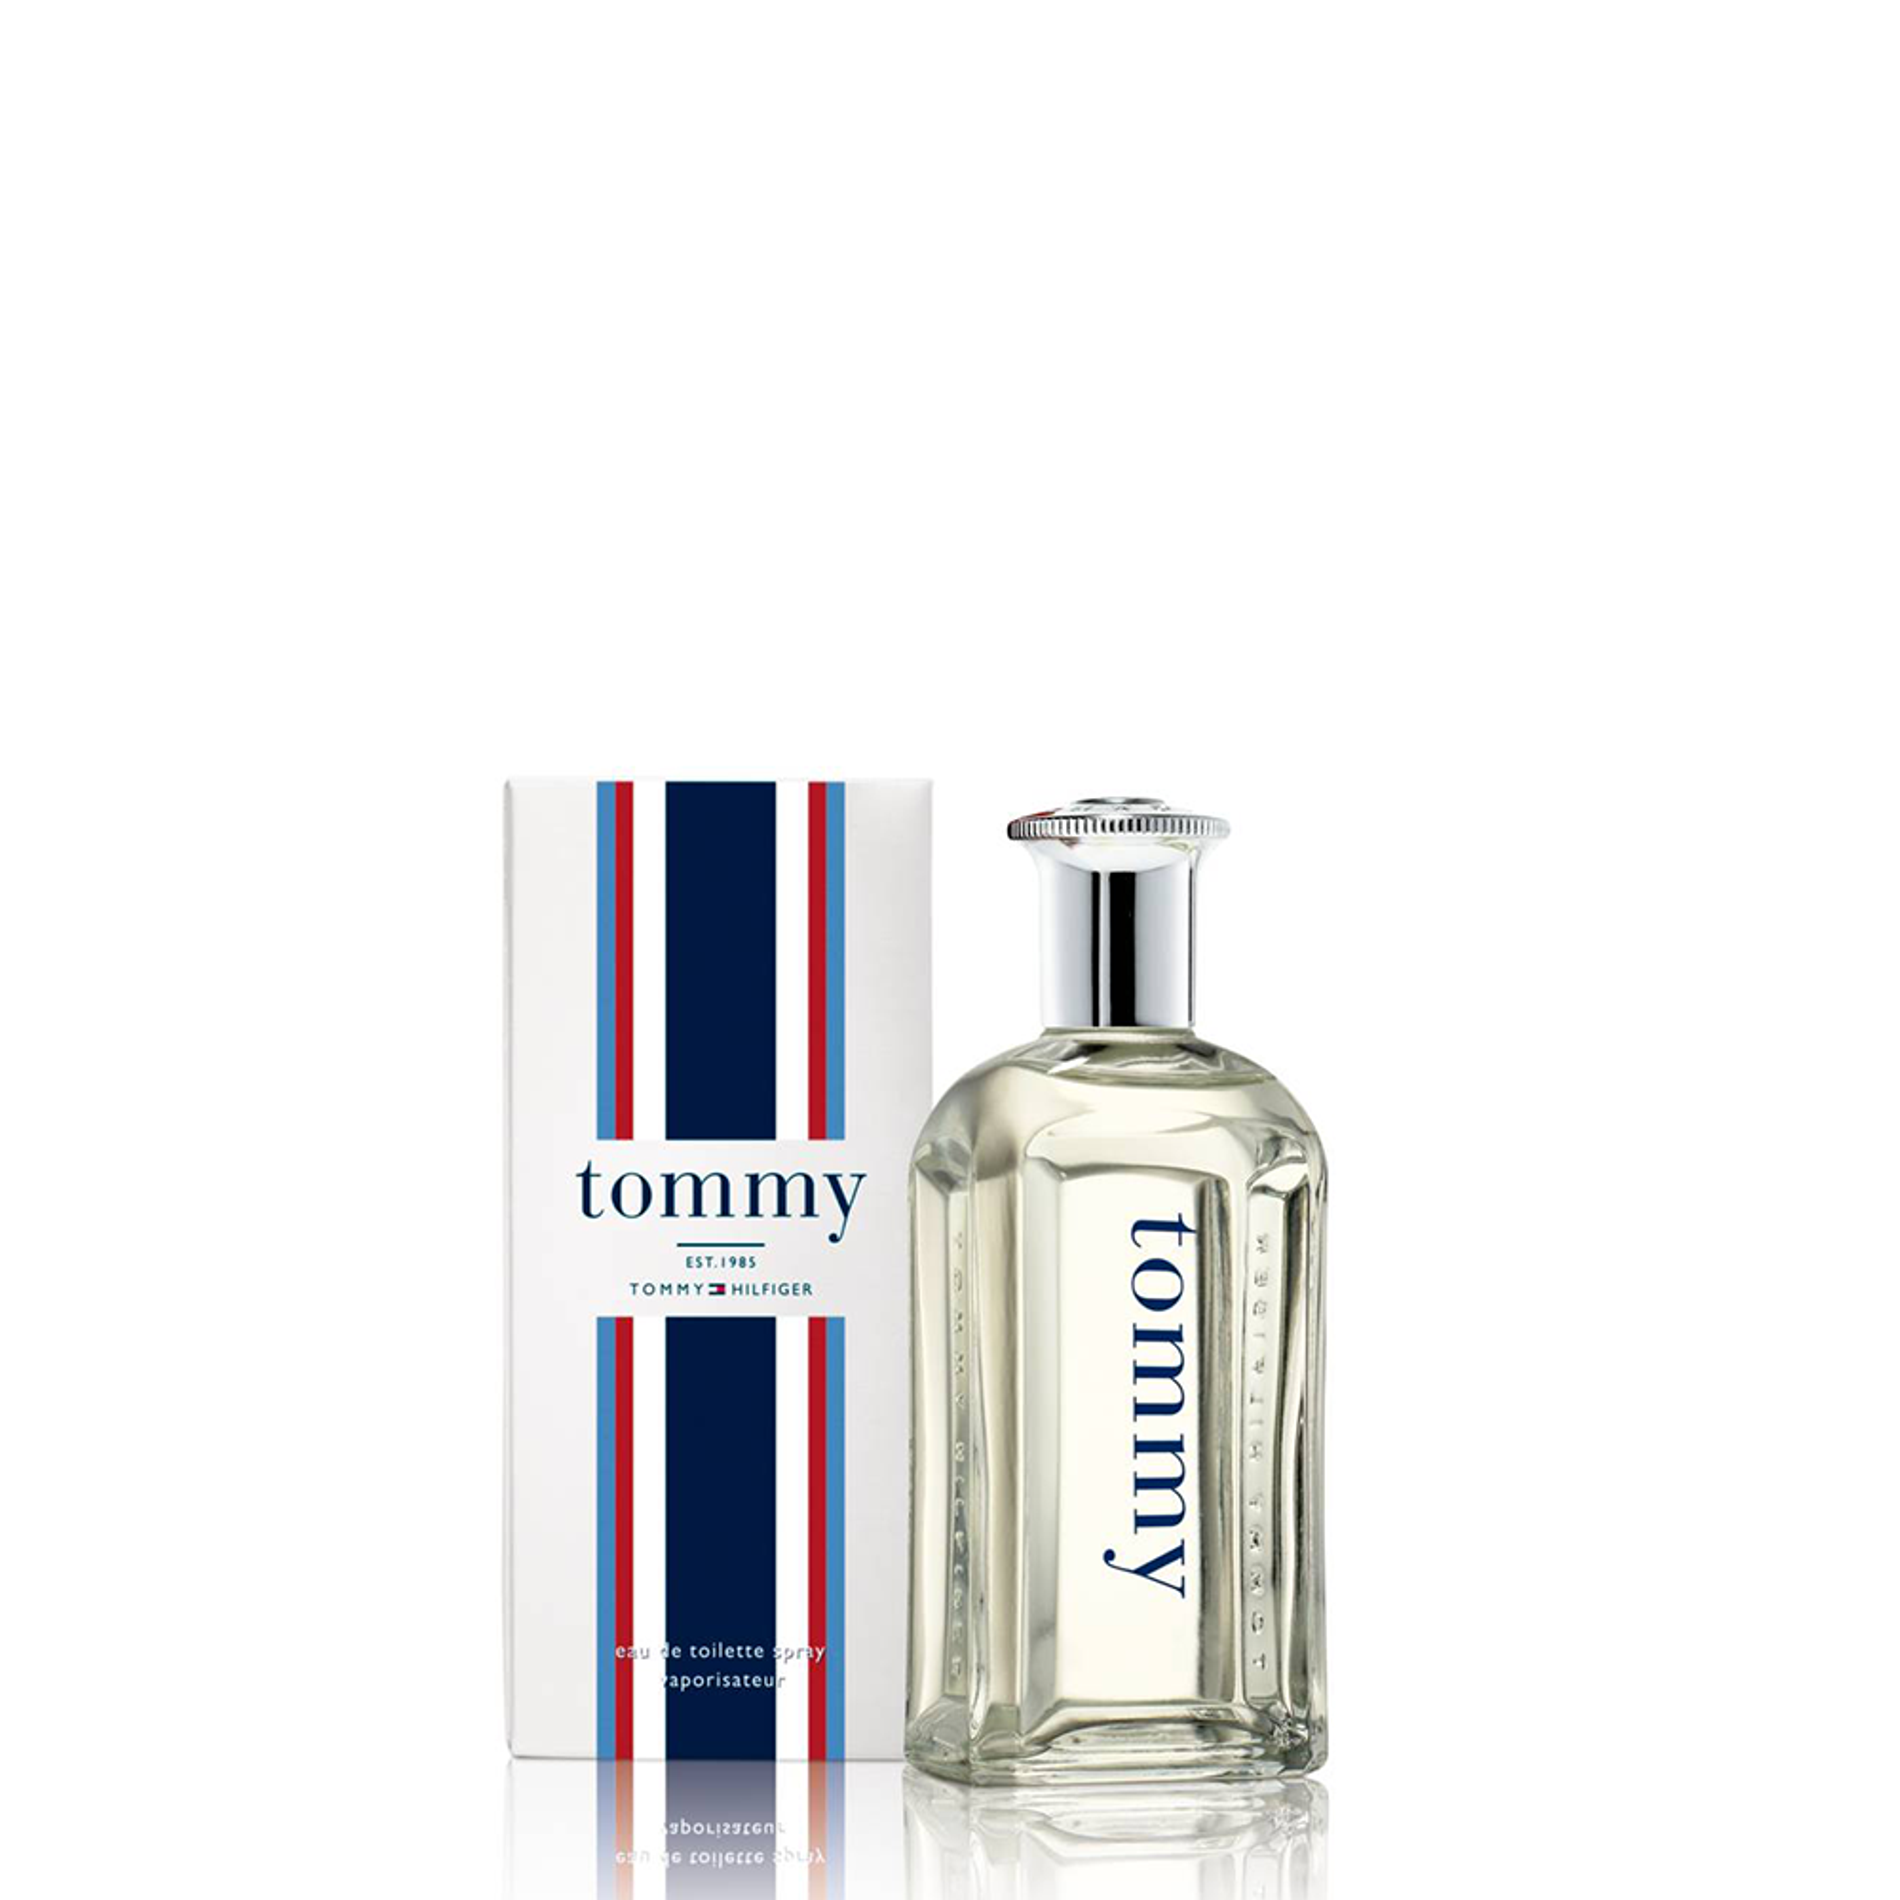 nuoc-hoa-danh-cho-nam-tommy-cologne-spray-edt-30ml-100ml-6